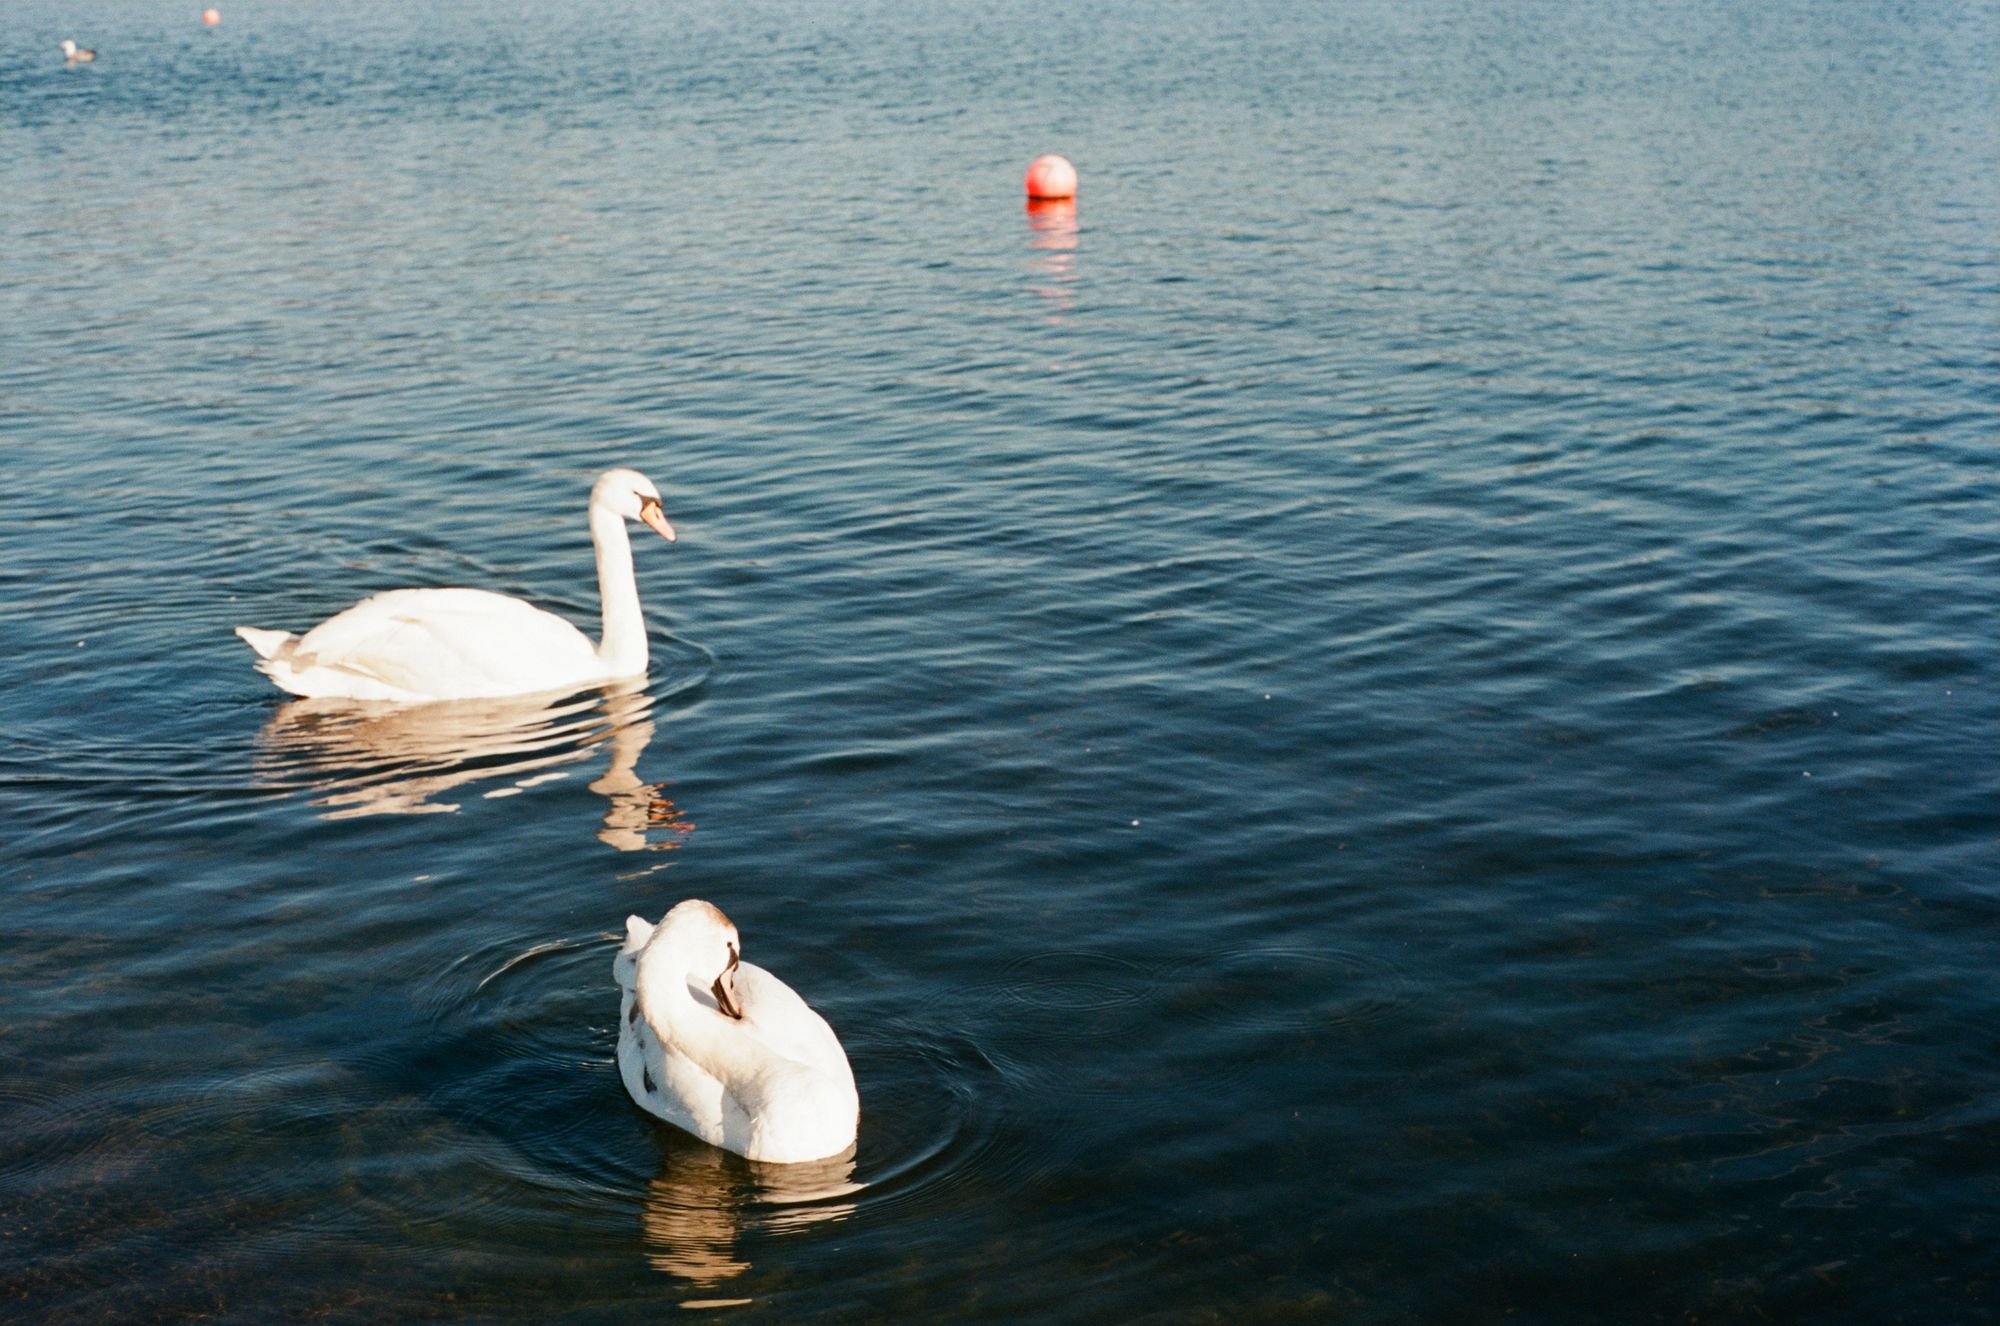 Two mute swans pootle along a calm pond. One of them, the closest to camera, preens themselves. A red-pink buoy, along with another bird and another buoy, float in the distance.